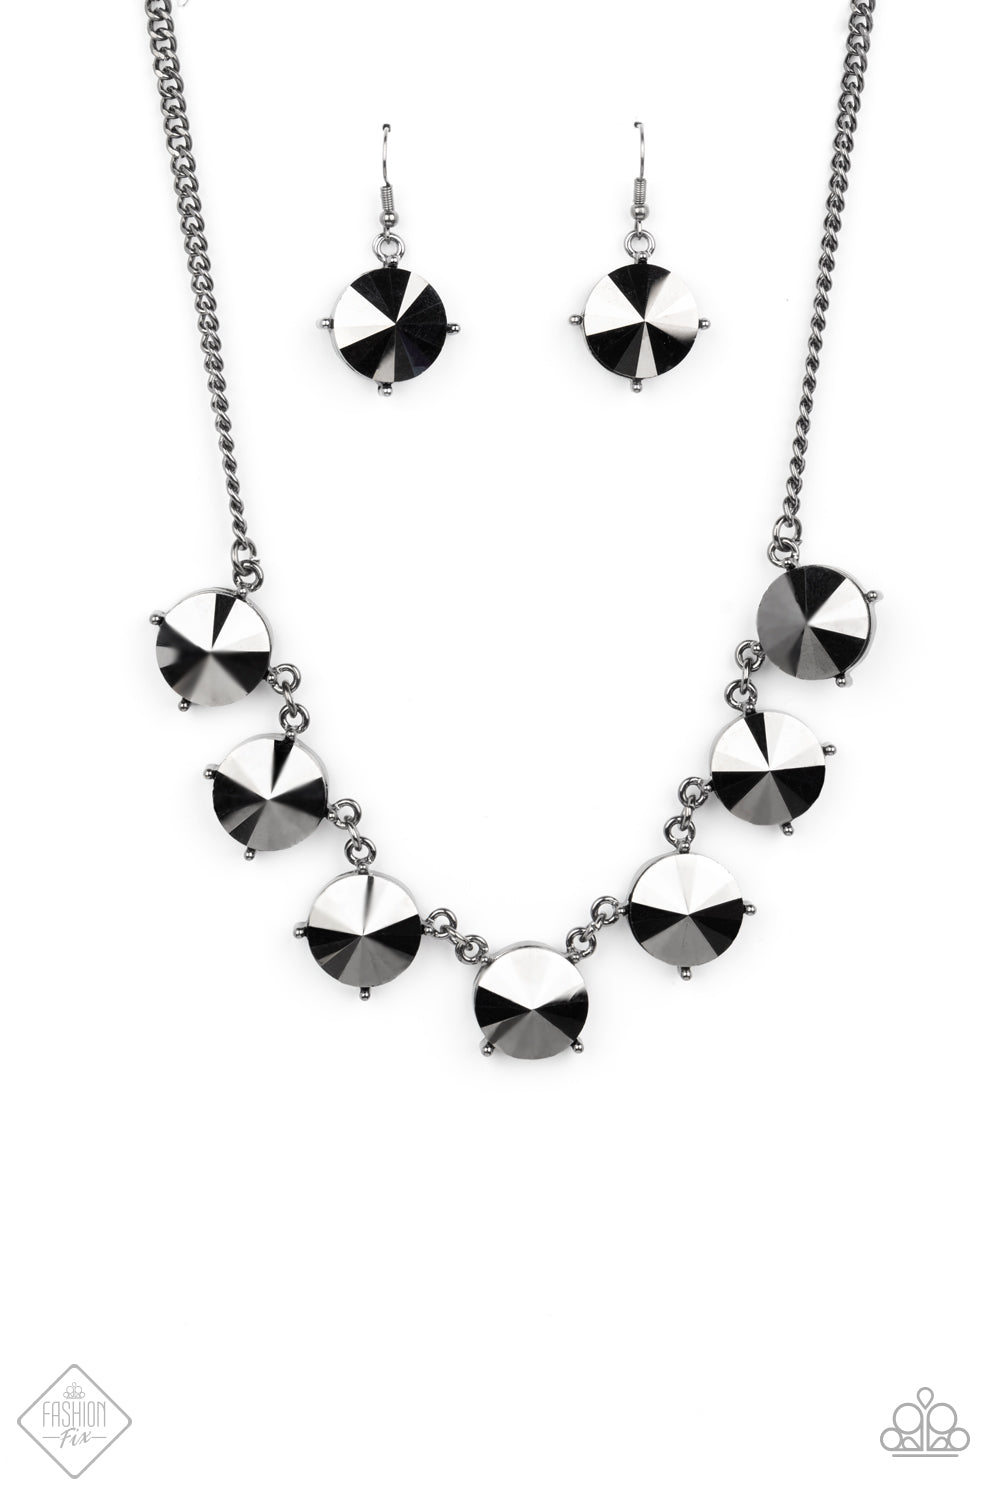 Paparazzi The SHOWCASE Must Go On Black Necklace - Fashion Fix Magnificent Musings September 2021